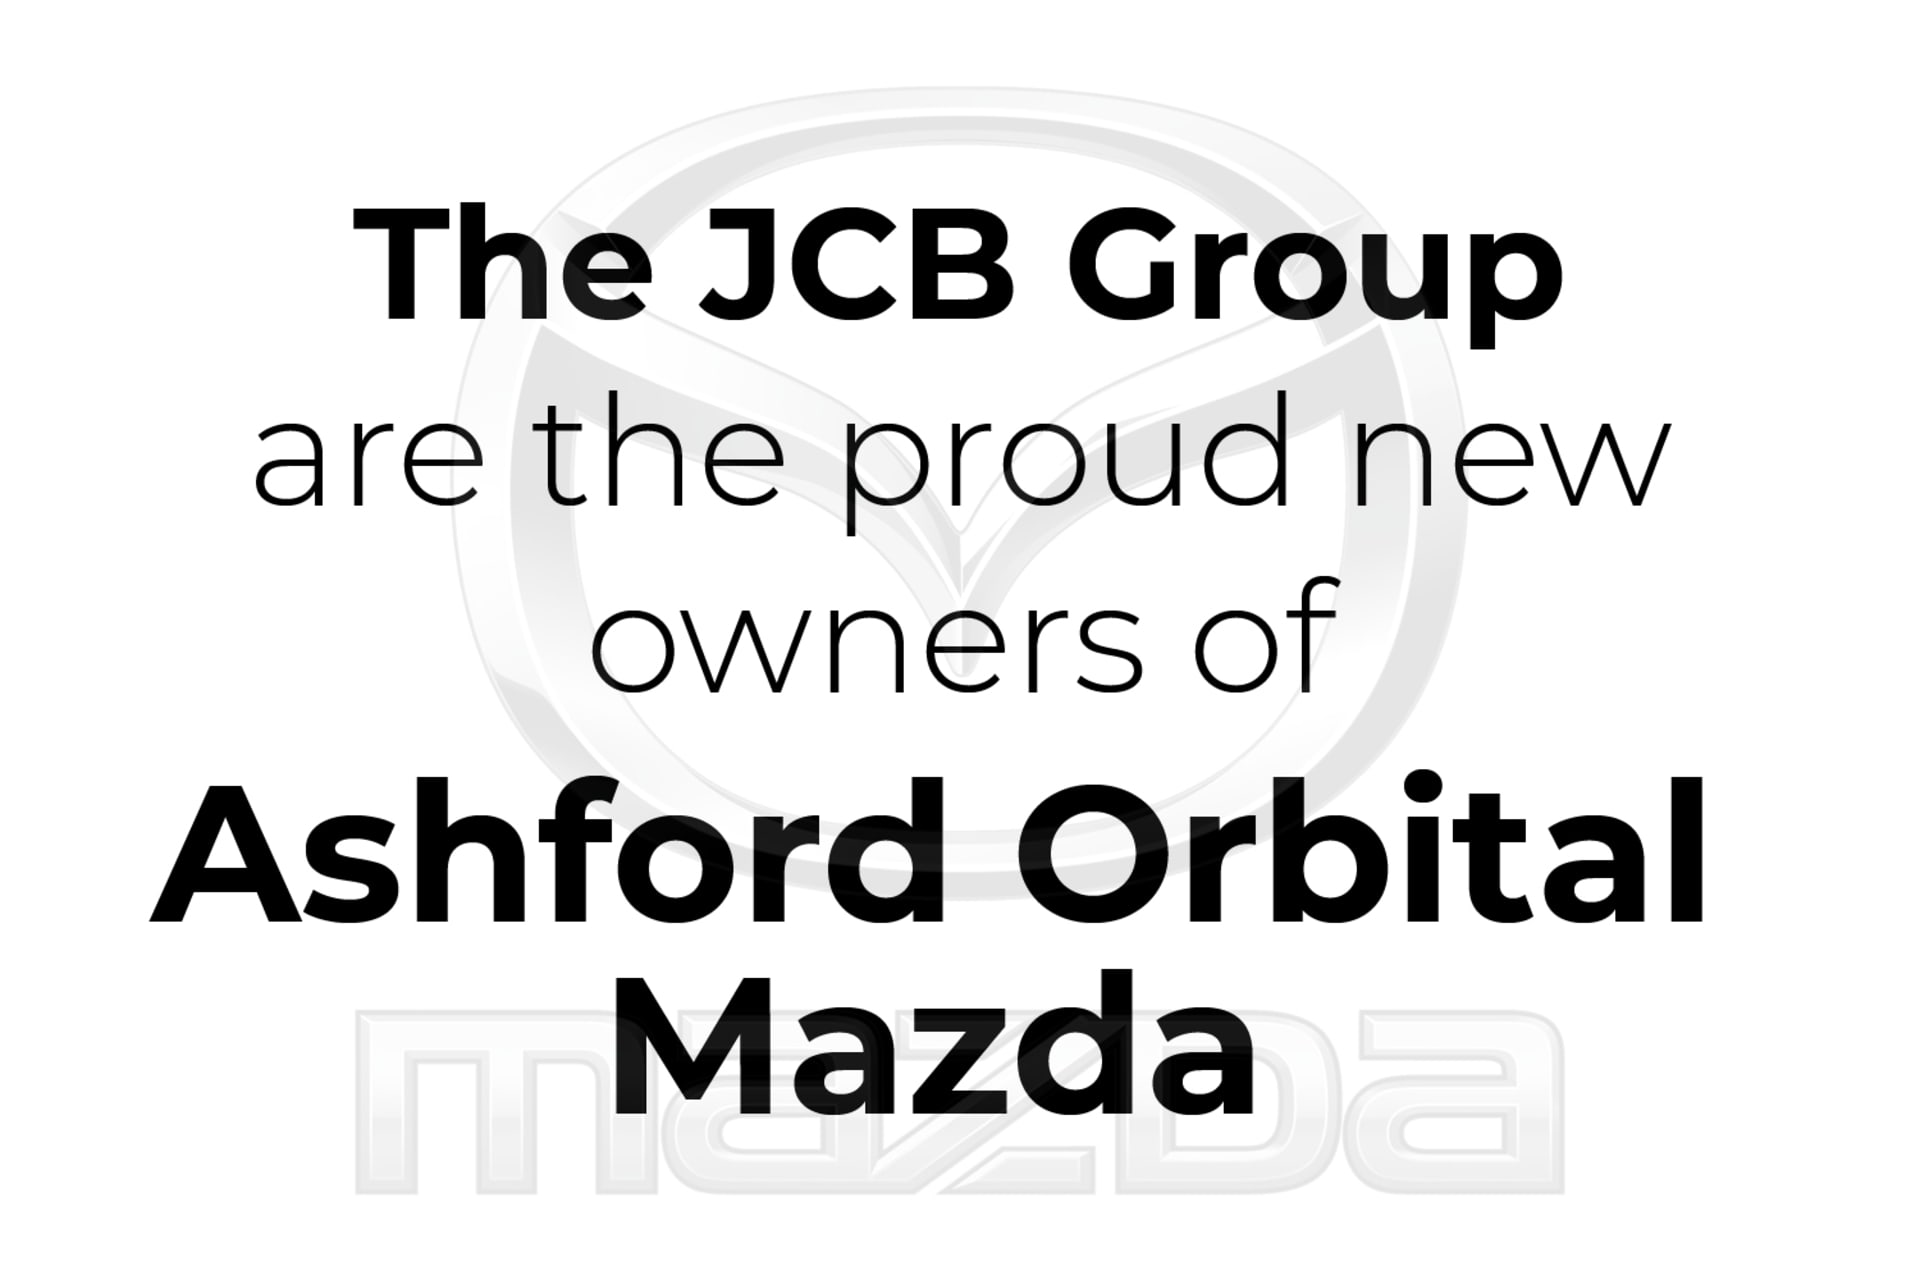 The JCB Group are the proud new owners of 